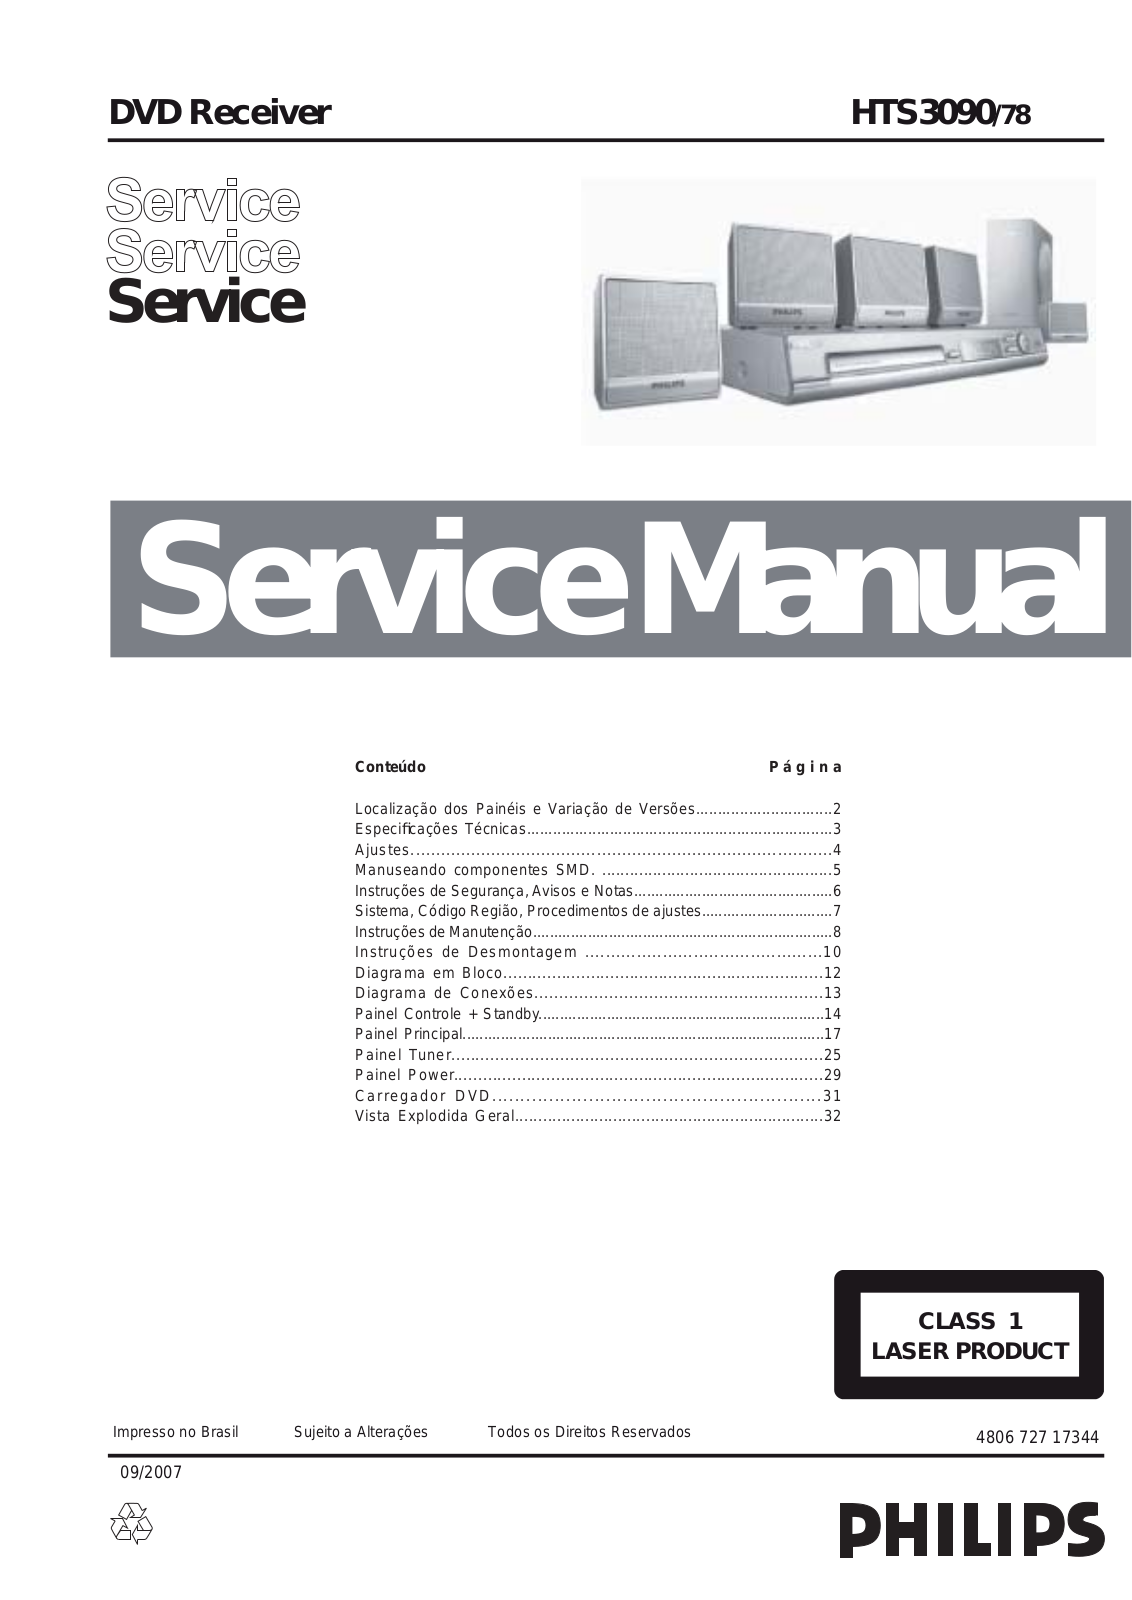 PHILIPS HTS3090-78 Service Manual